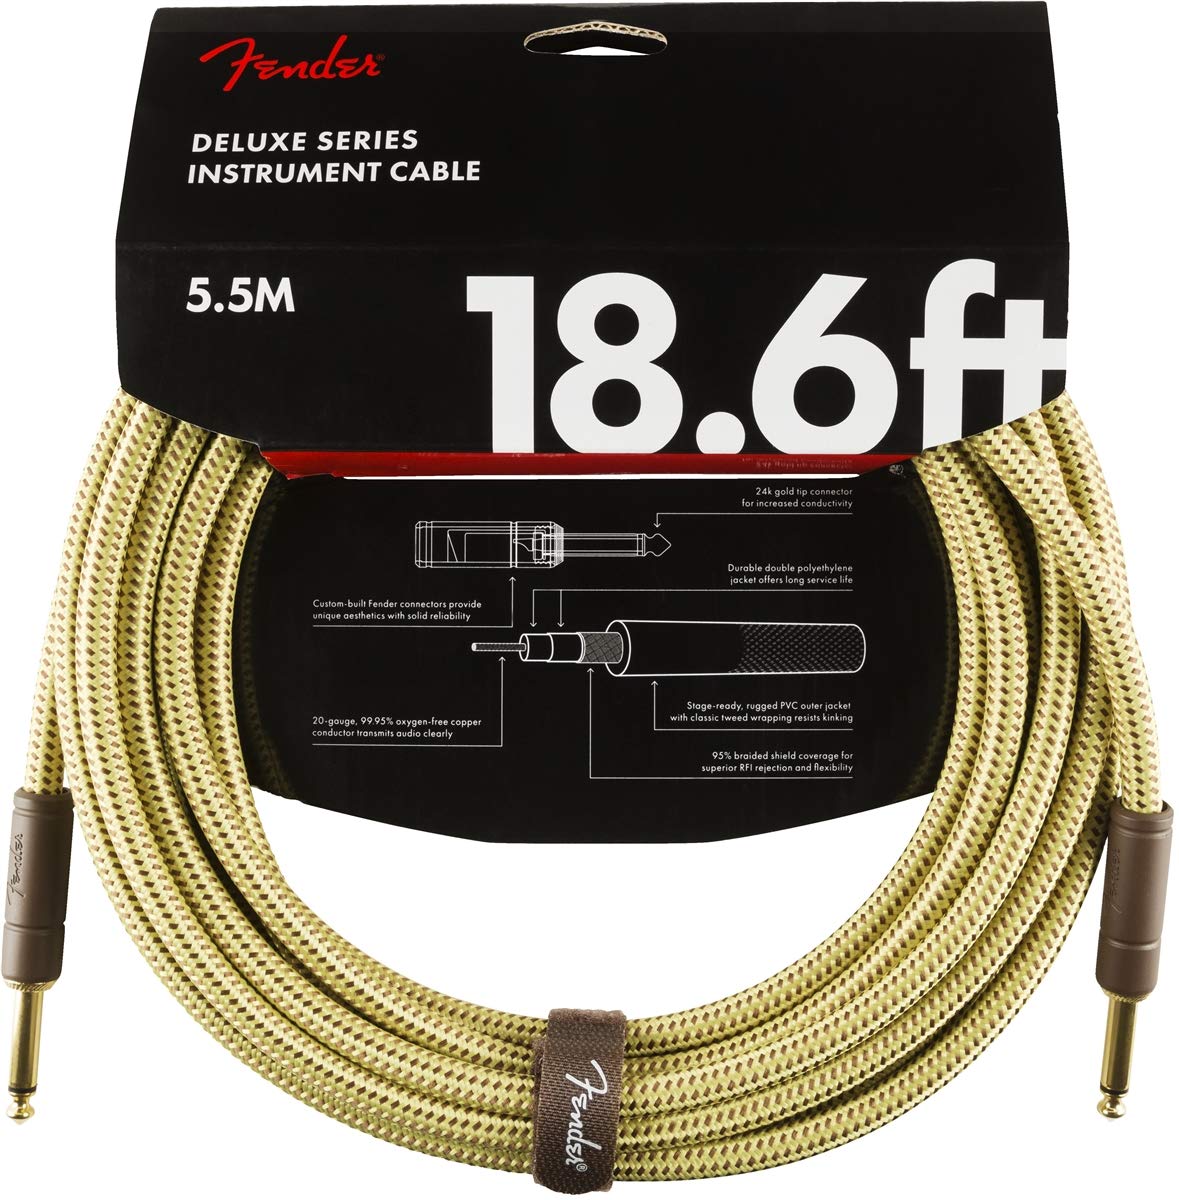 🎸 Rock out with the Fender Deluxe Series Instrument Cable at an incredible discount! 🎶🔌

✅ $26.99
❌ Regular Price: $44.99

🔗 amzn.to/3BWldmU

#Fender #InstrumentCable #MusicGear #SoundQuality #LimitedTimeOffer